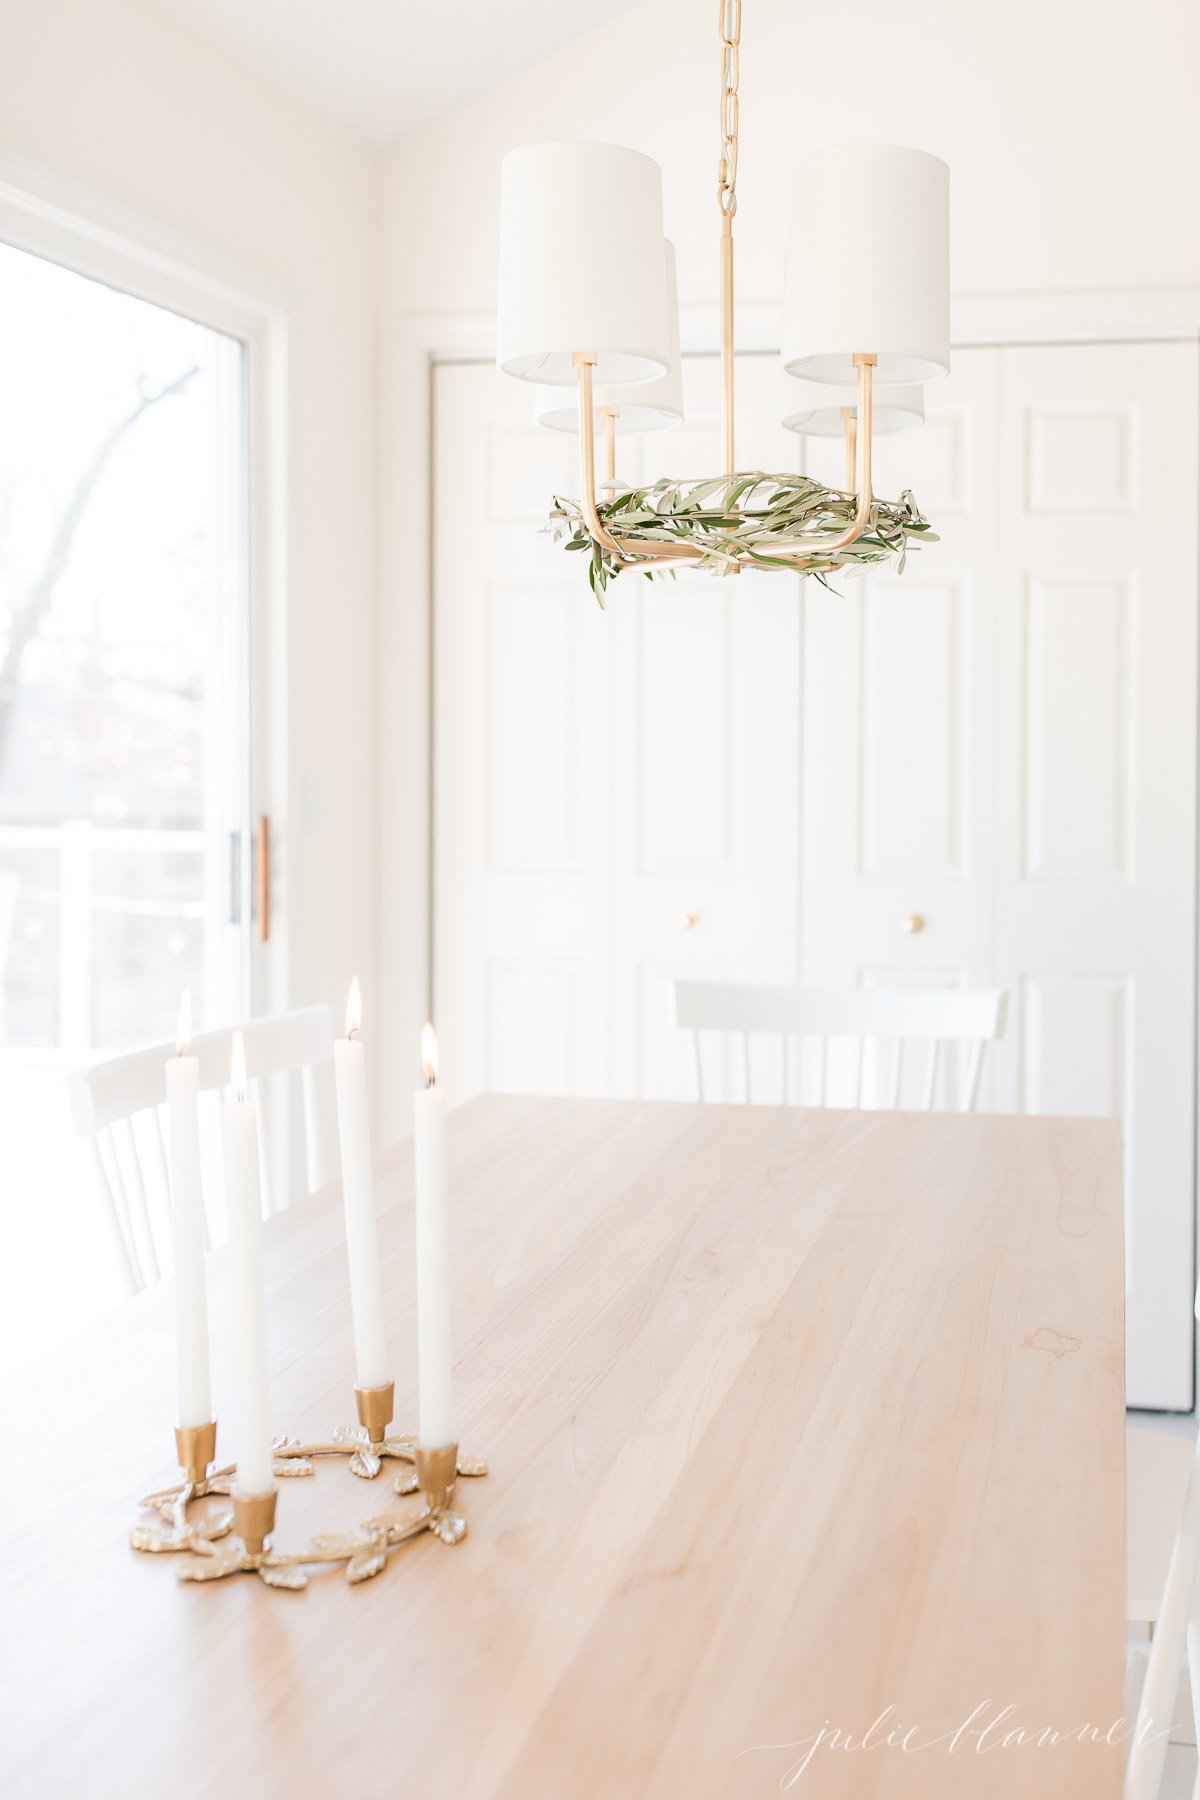 A white dining room table with white chairs and a gold laurel wreath candle holder centerpiece.